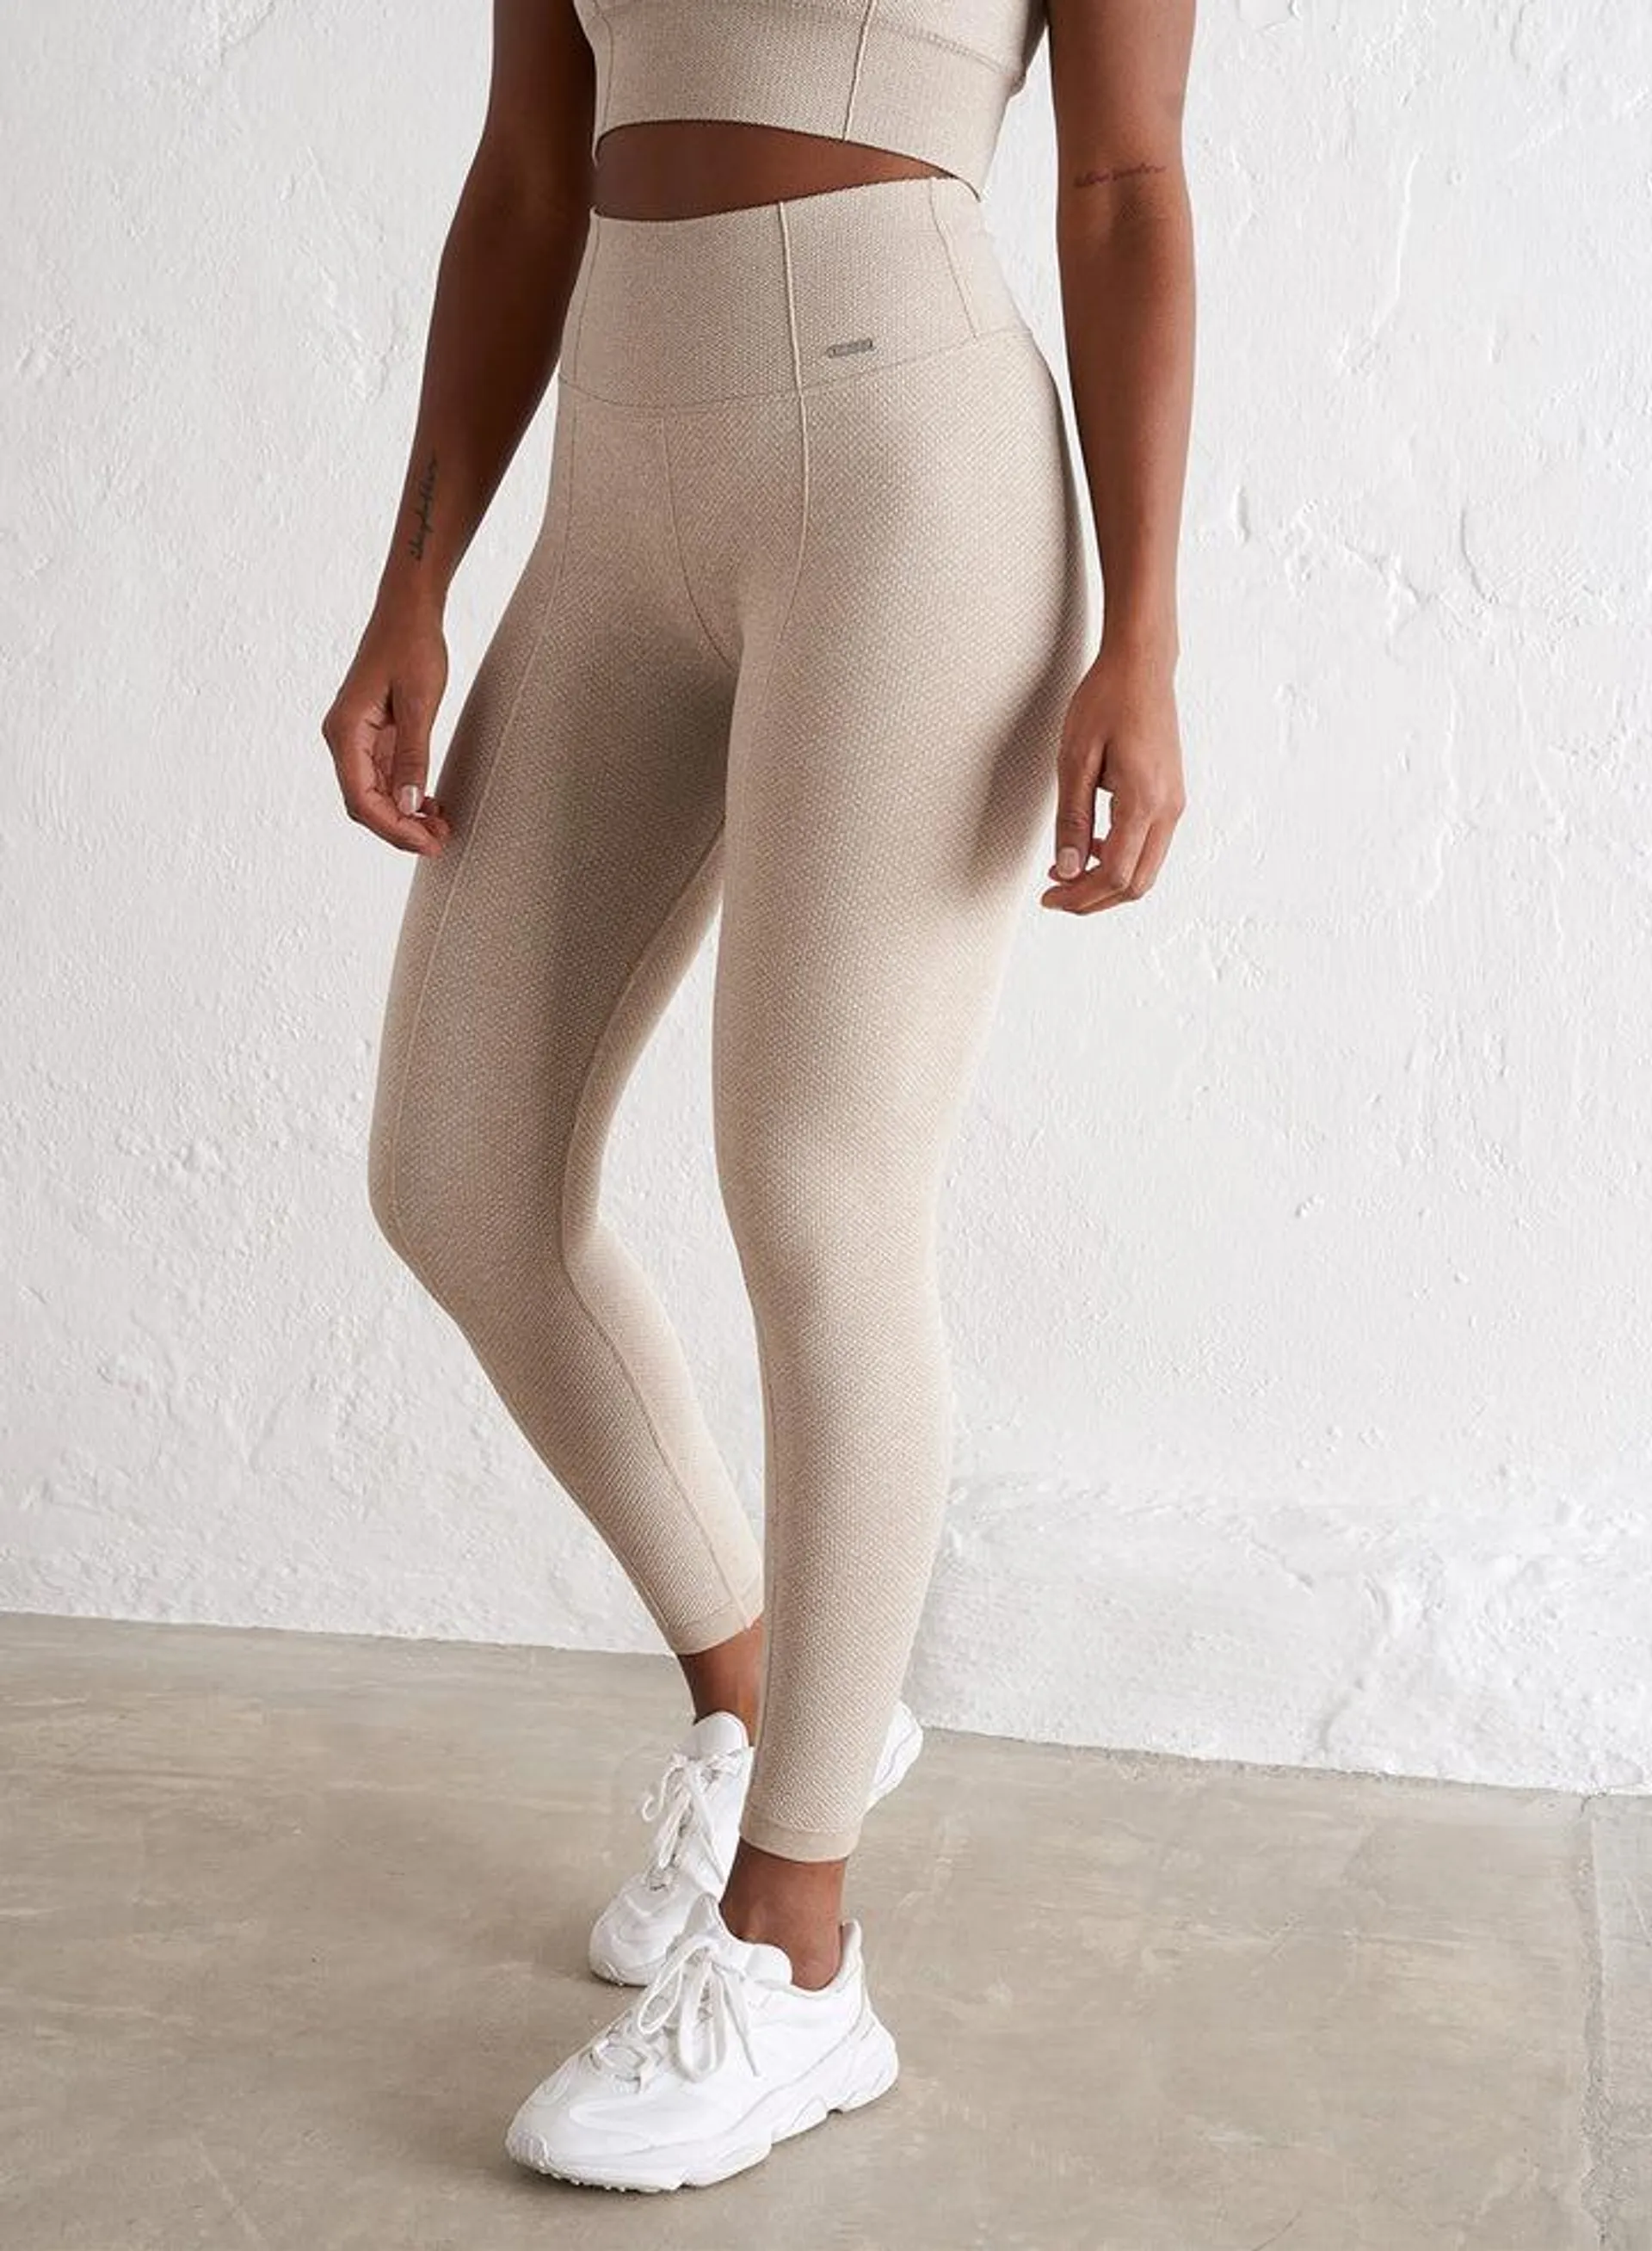 BEIGE LUXE SEAMLESS TIGHTS